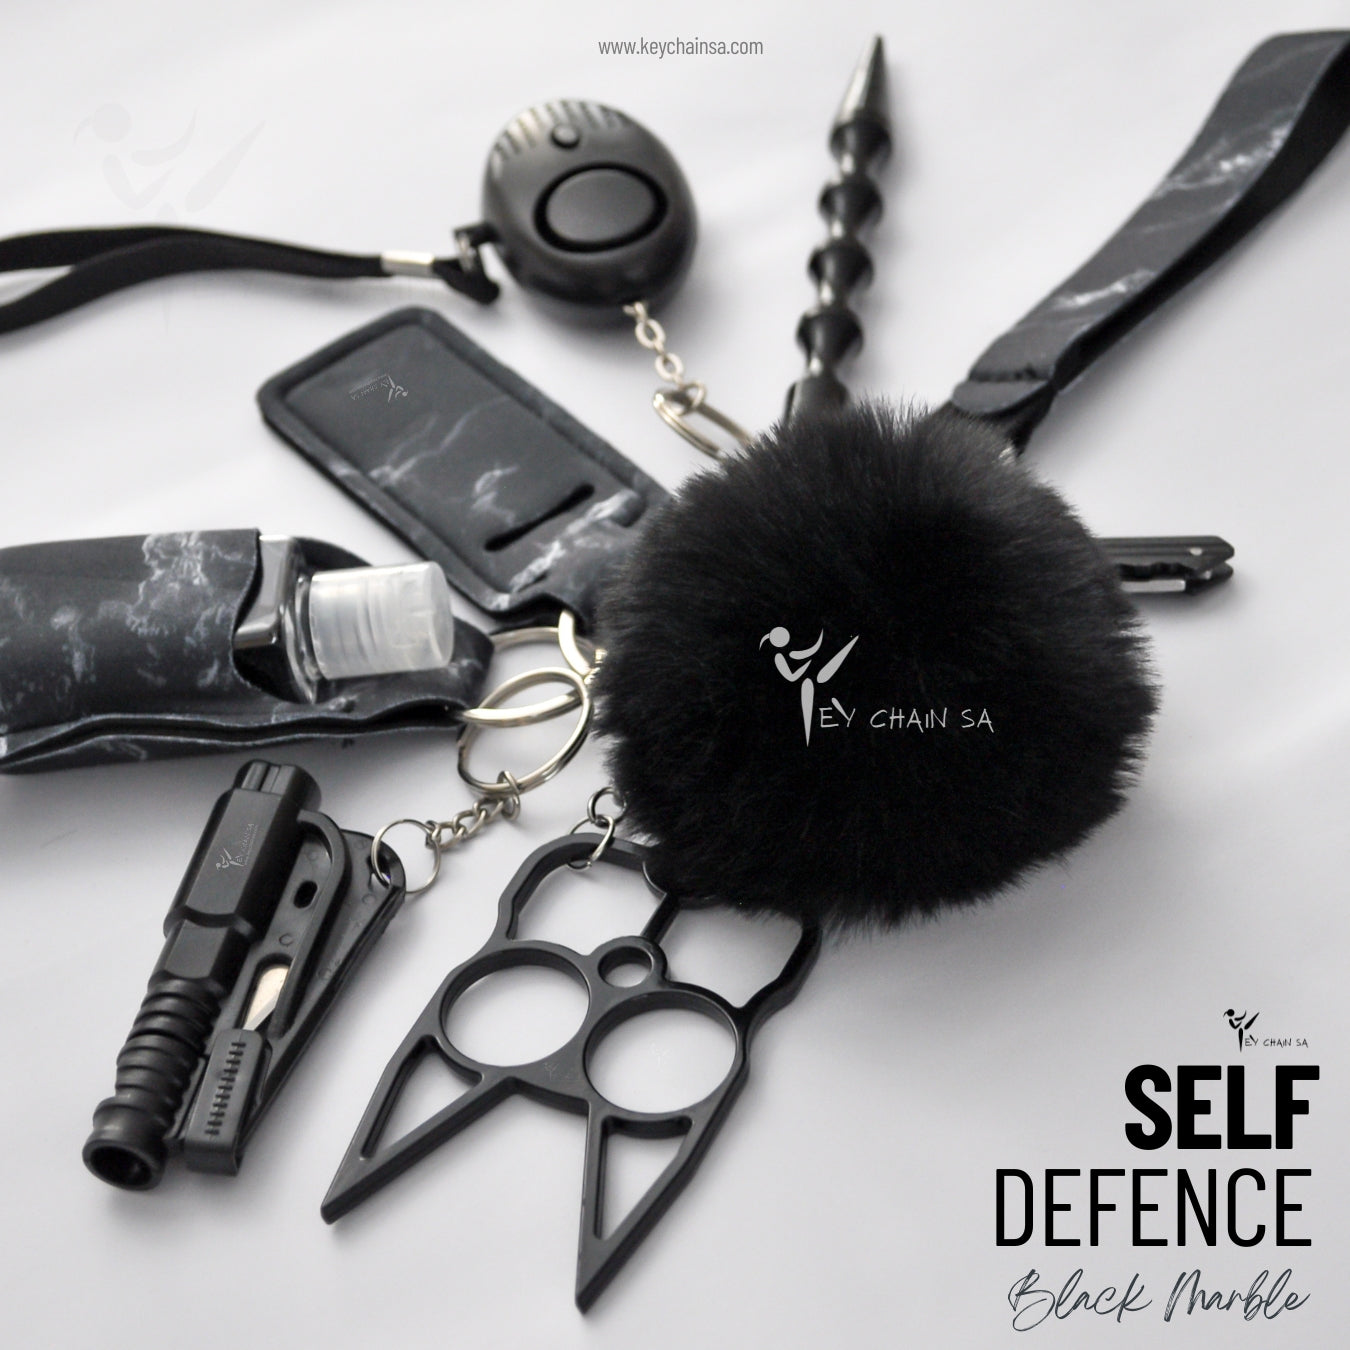 1 whole Set Self-Defense Keychain Set for Women Safety Personal